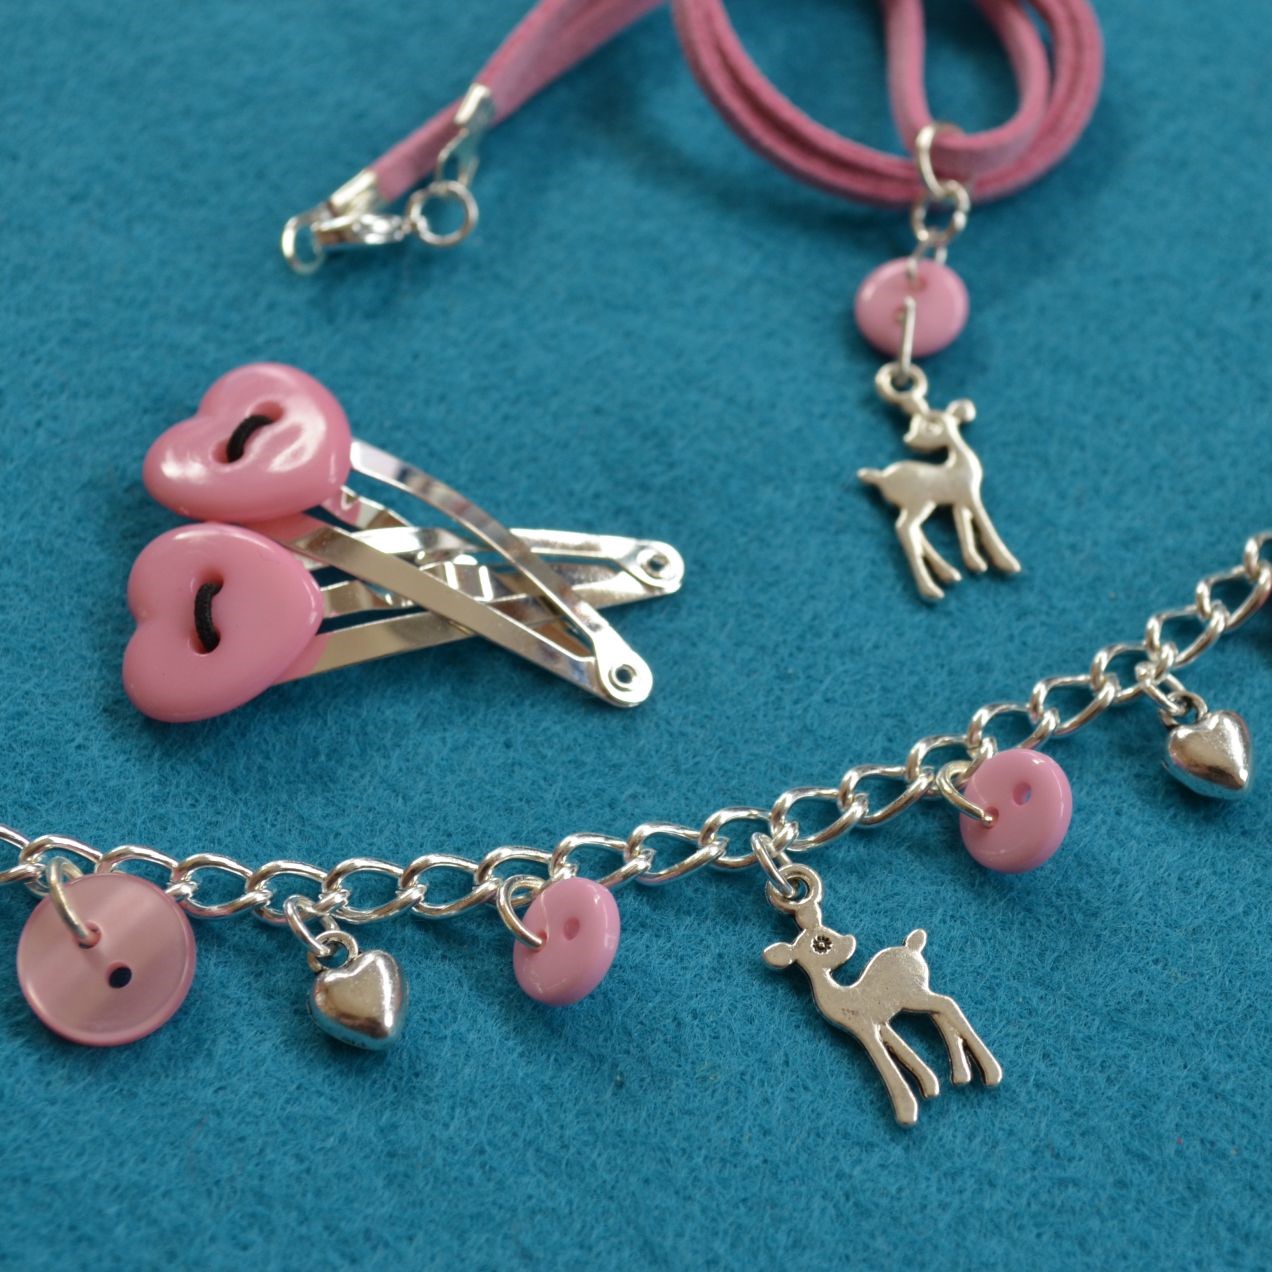 Deer Child’s Button Charm Necklace